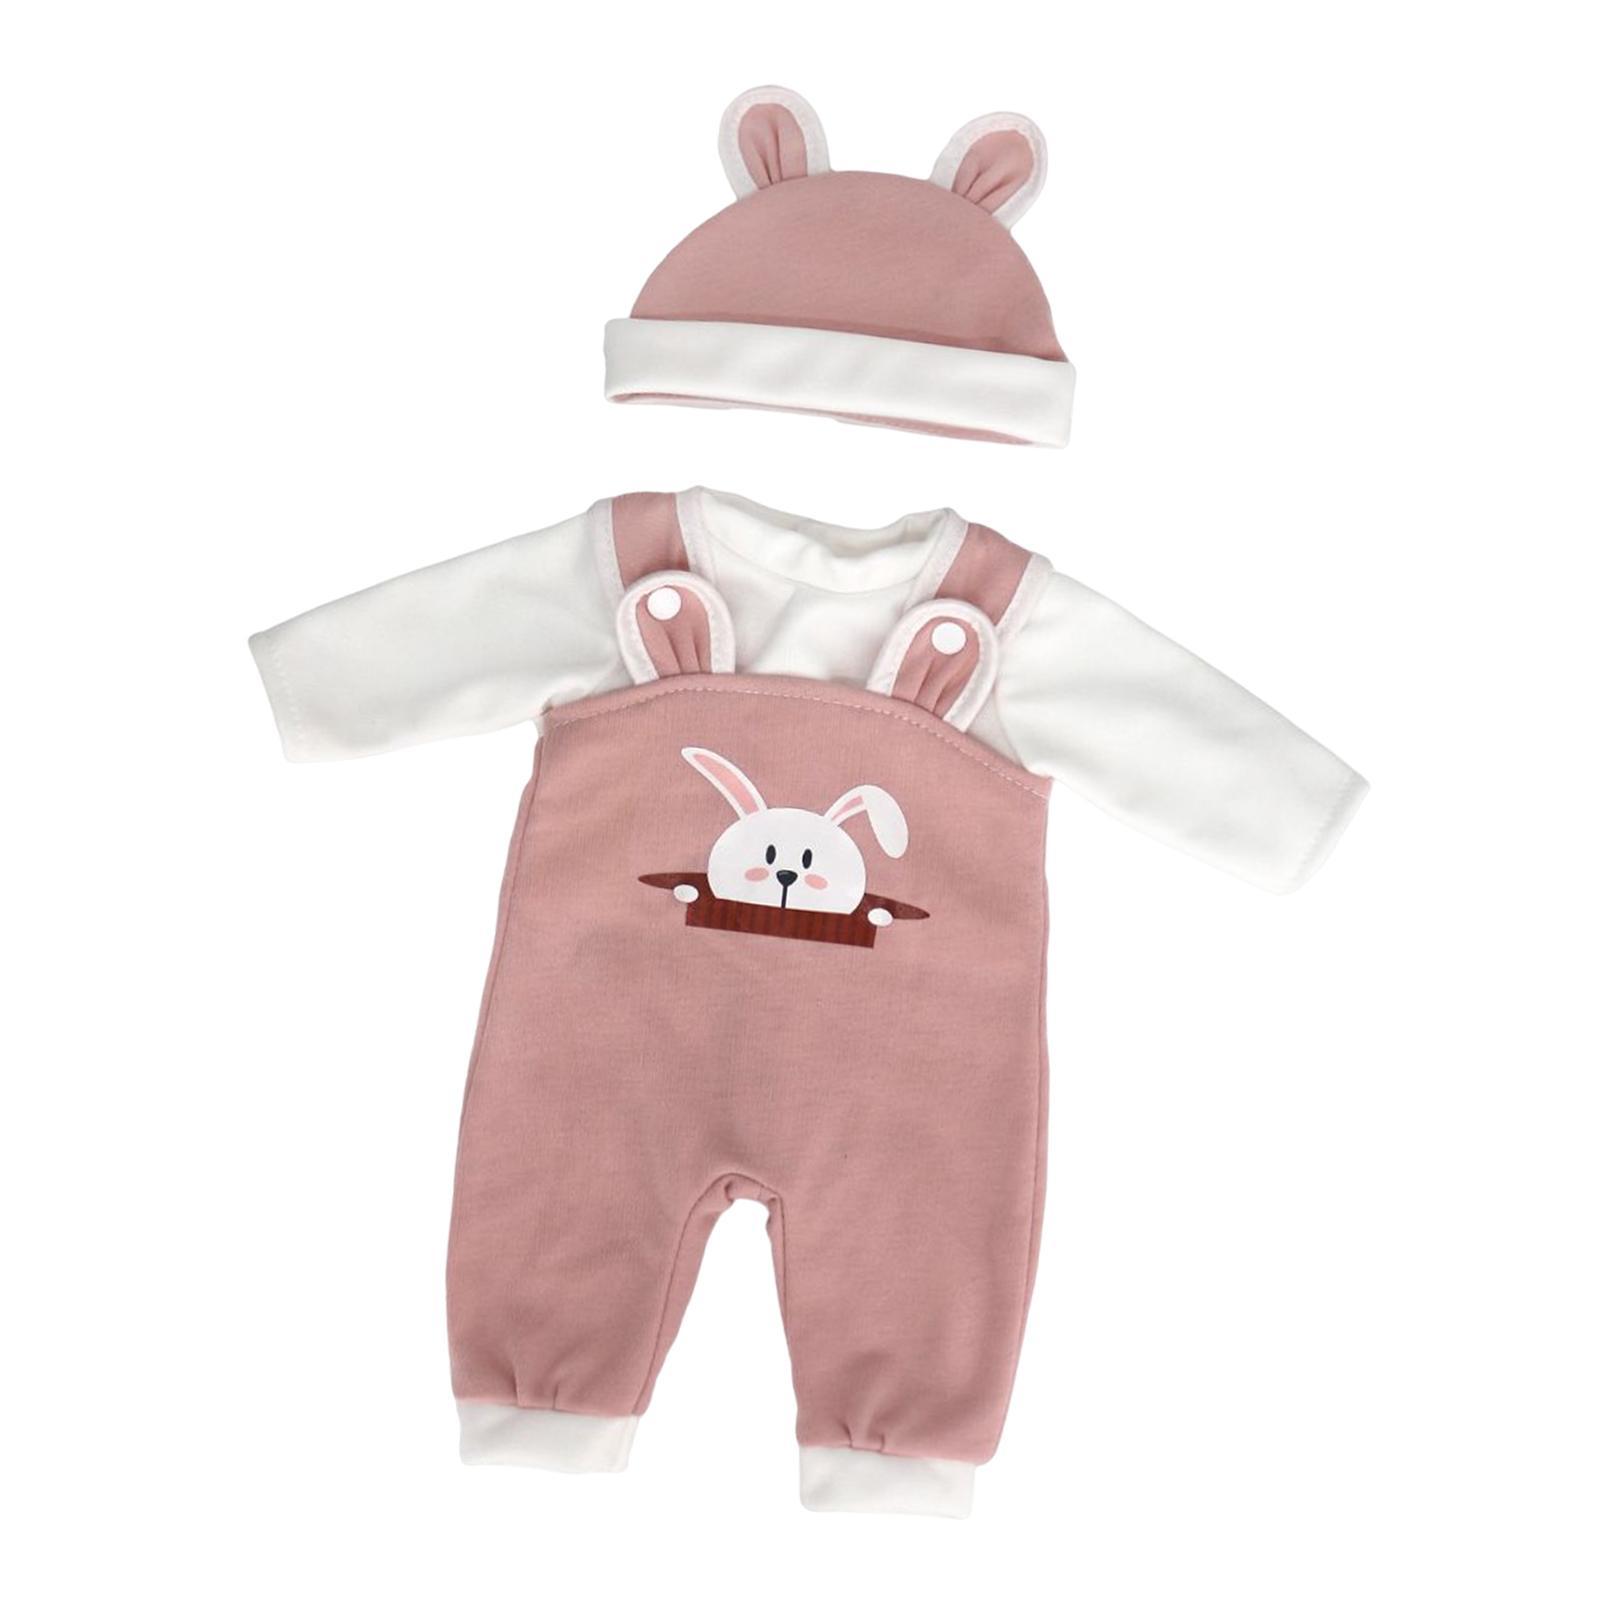 Baby Doll Clothes Accessories Doll Clothes Outfits and Accessories for Role Play